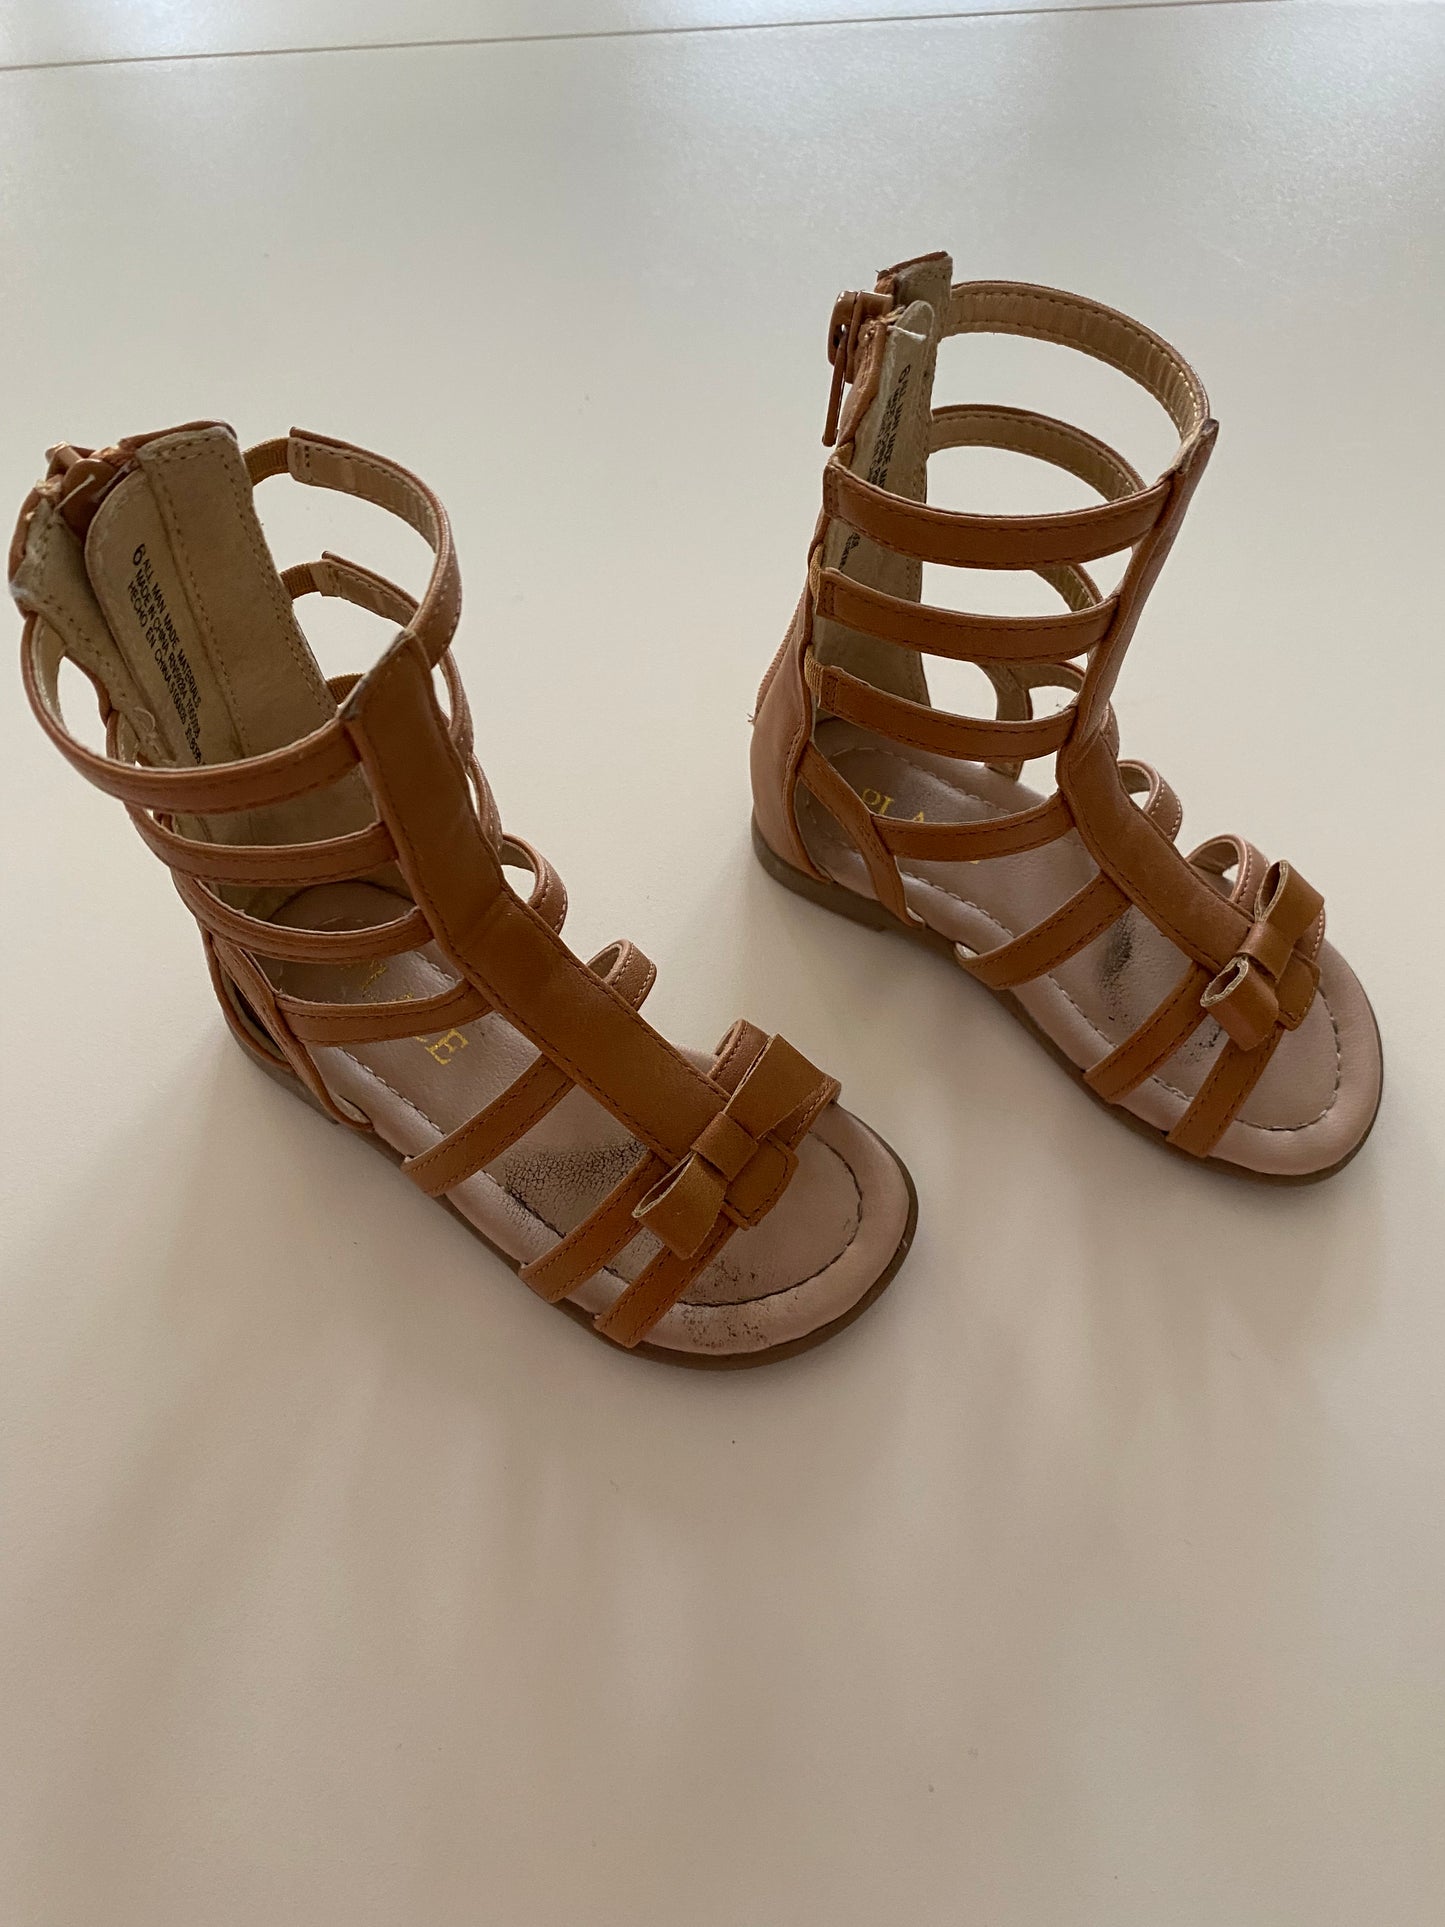 The Children’s Place Brown Gladiator Style Sandal Toddler Girls Shoe Size 6